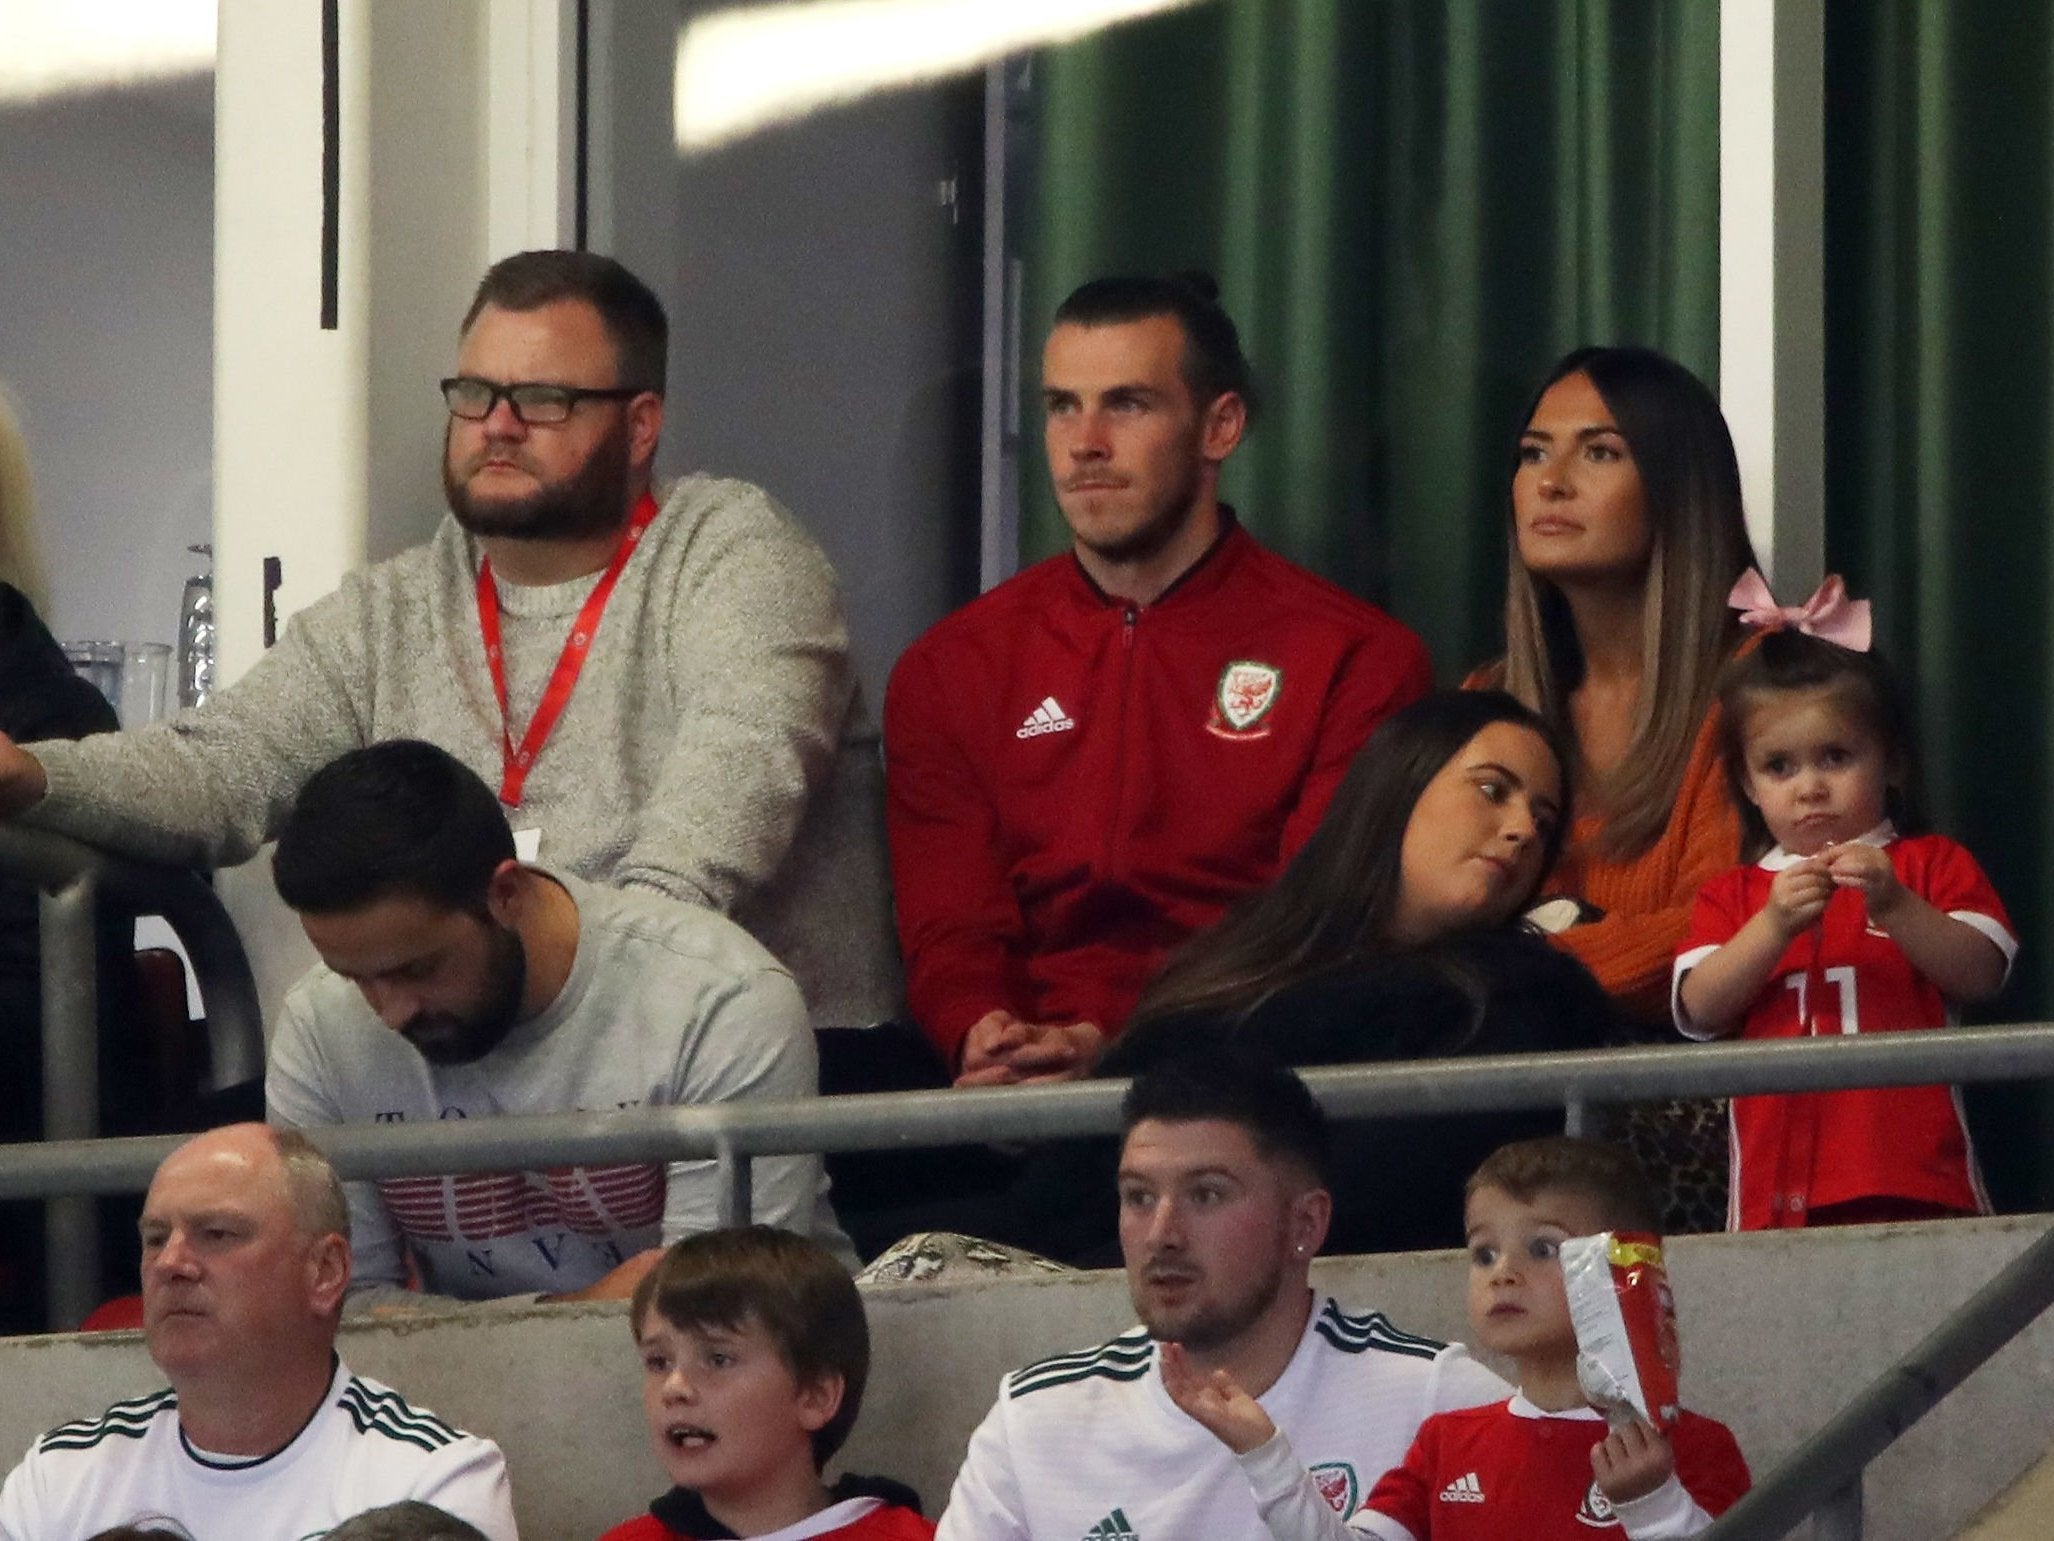 Gareth Bale watched the Spain game from the stands